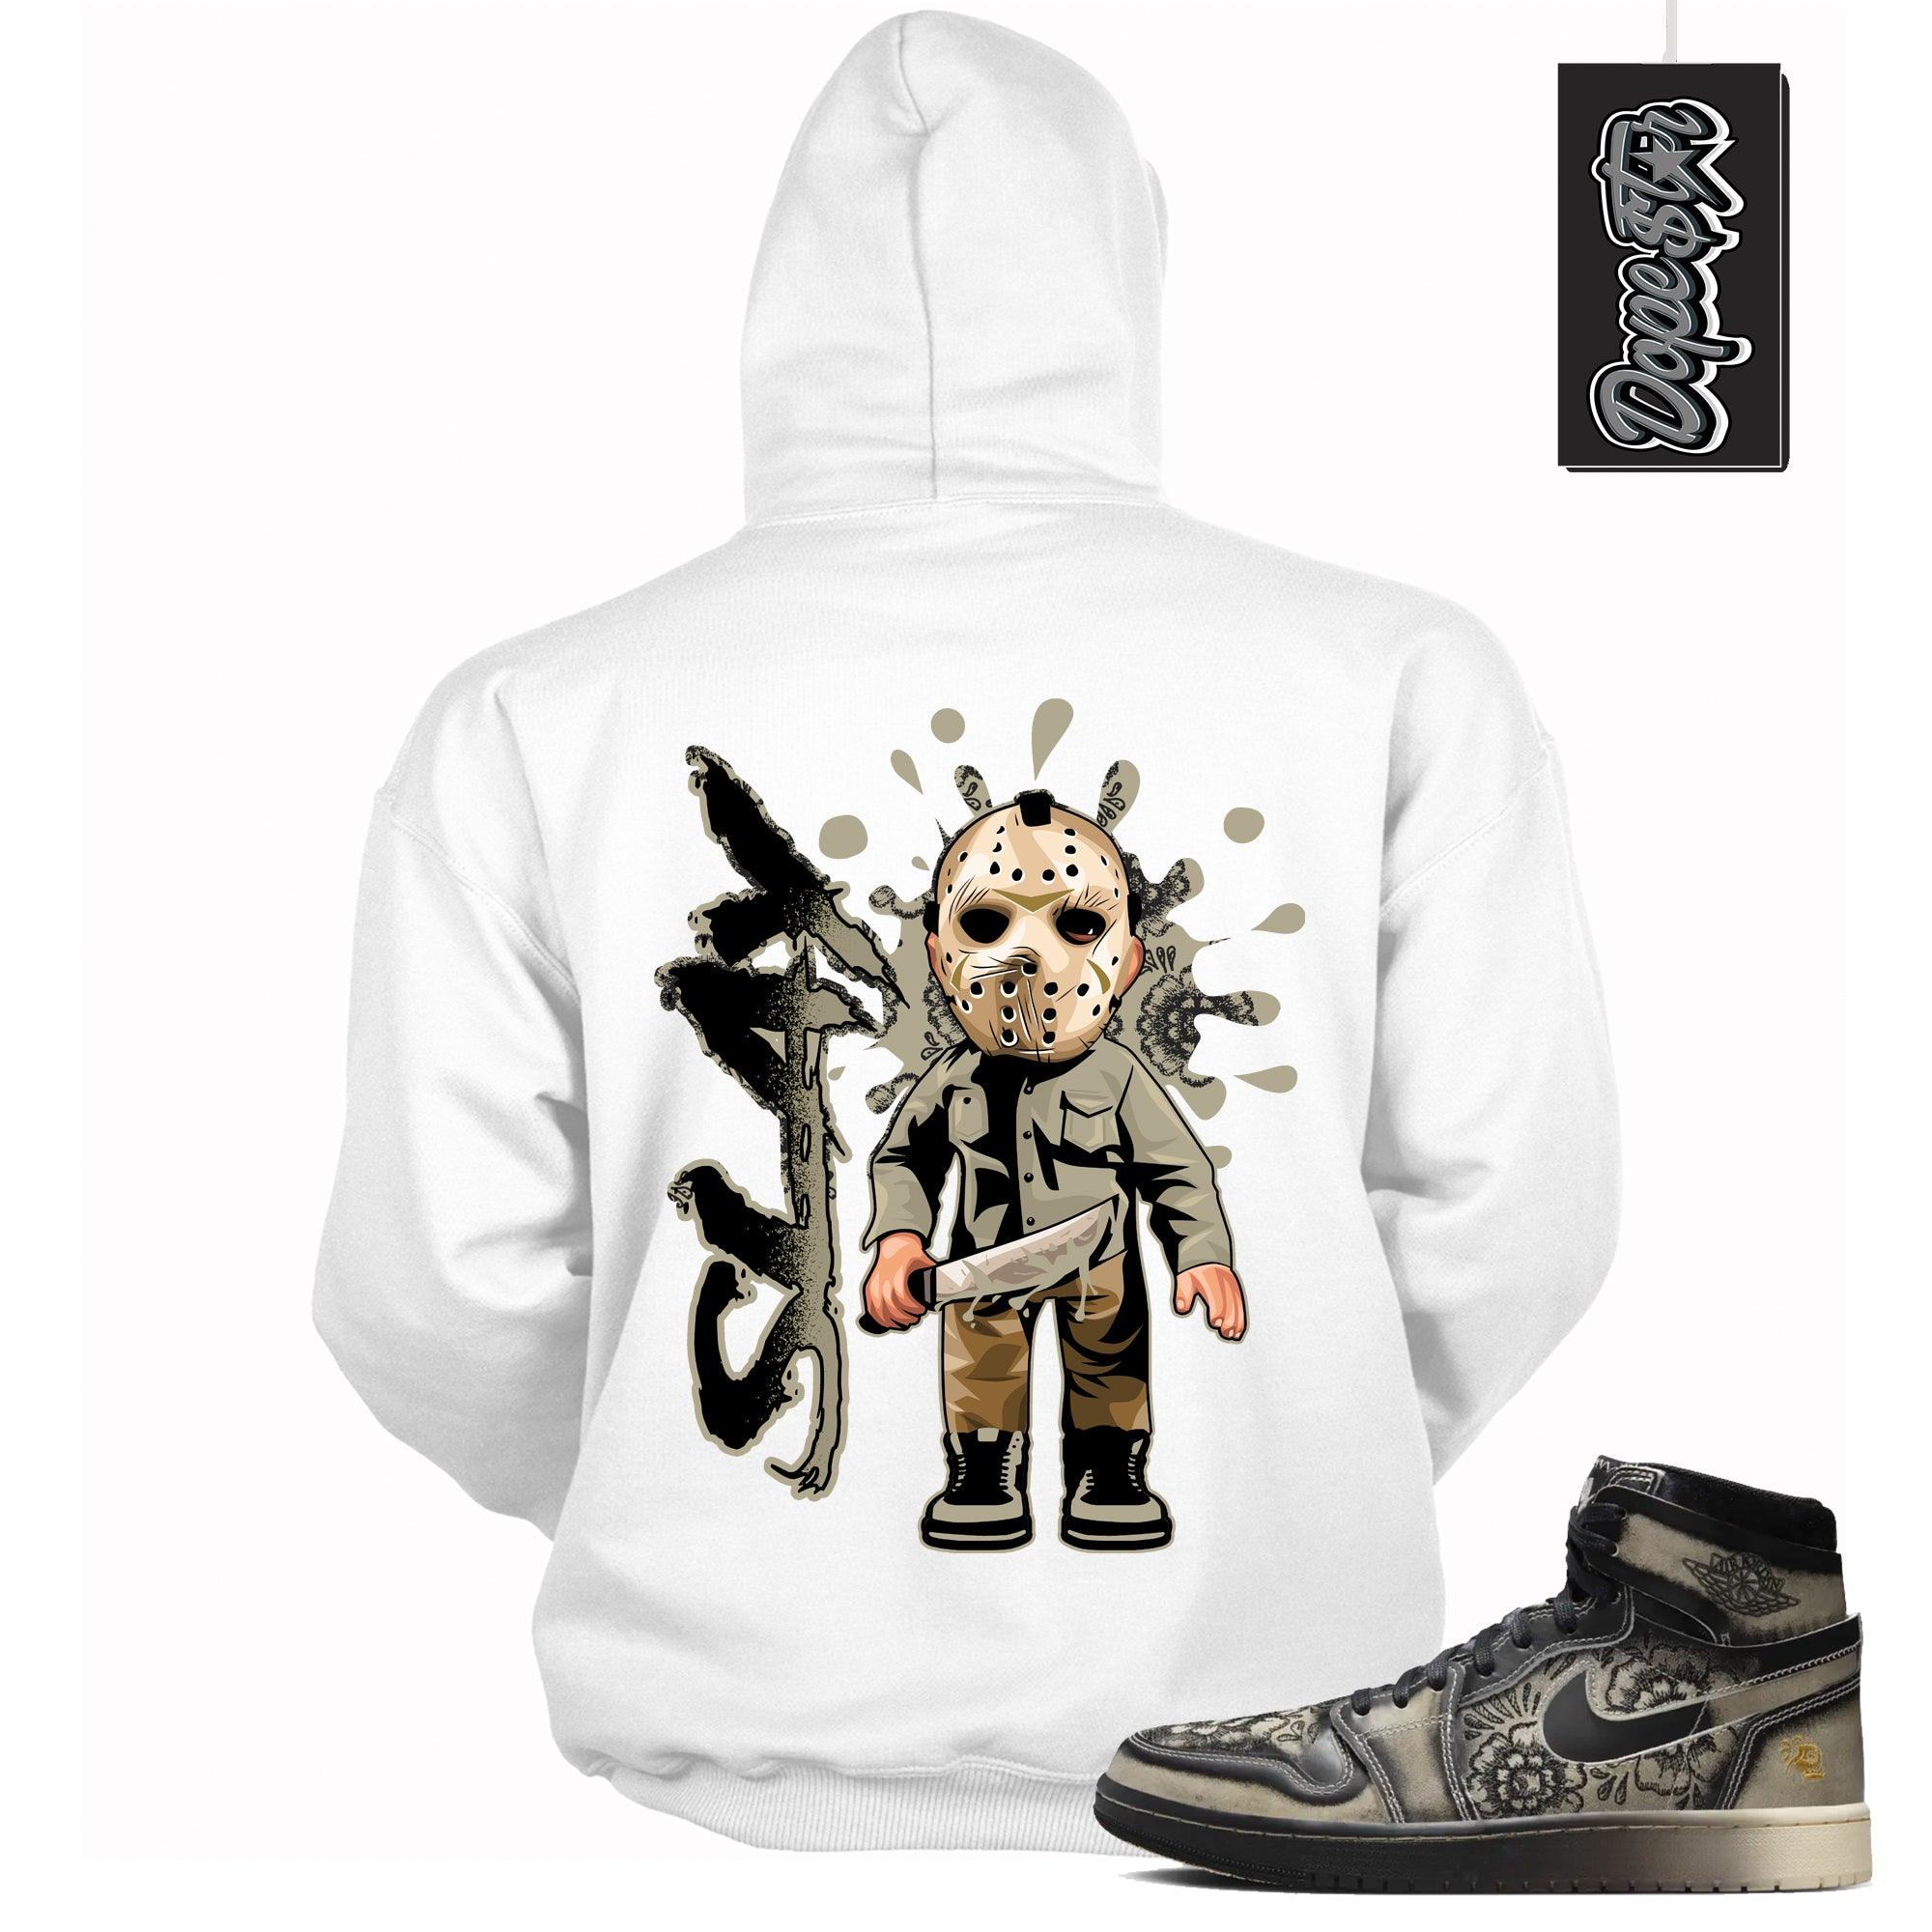 Cool White Graphic Hoodie with “ SLAY “ print, that perfectly matches Air Jordan 1 High Zoom Comfort 2 Dia de Muertos Black and Pale Ivory sneakers